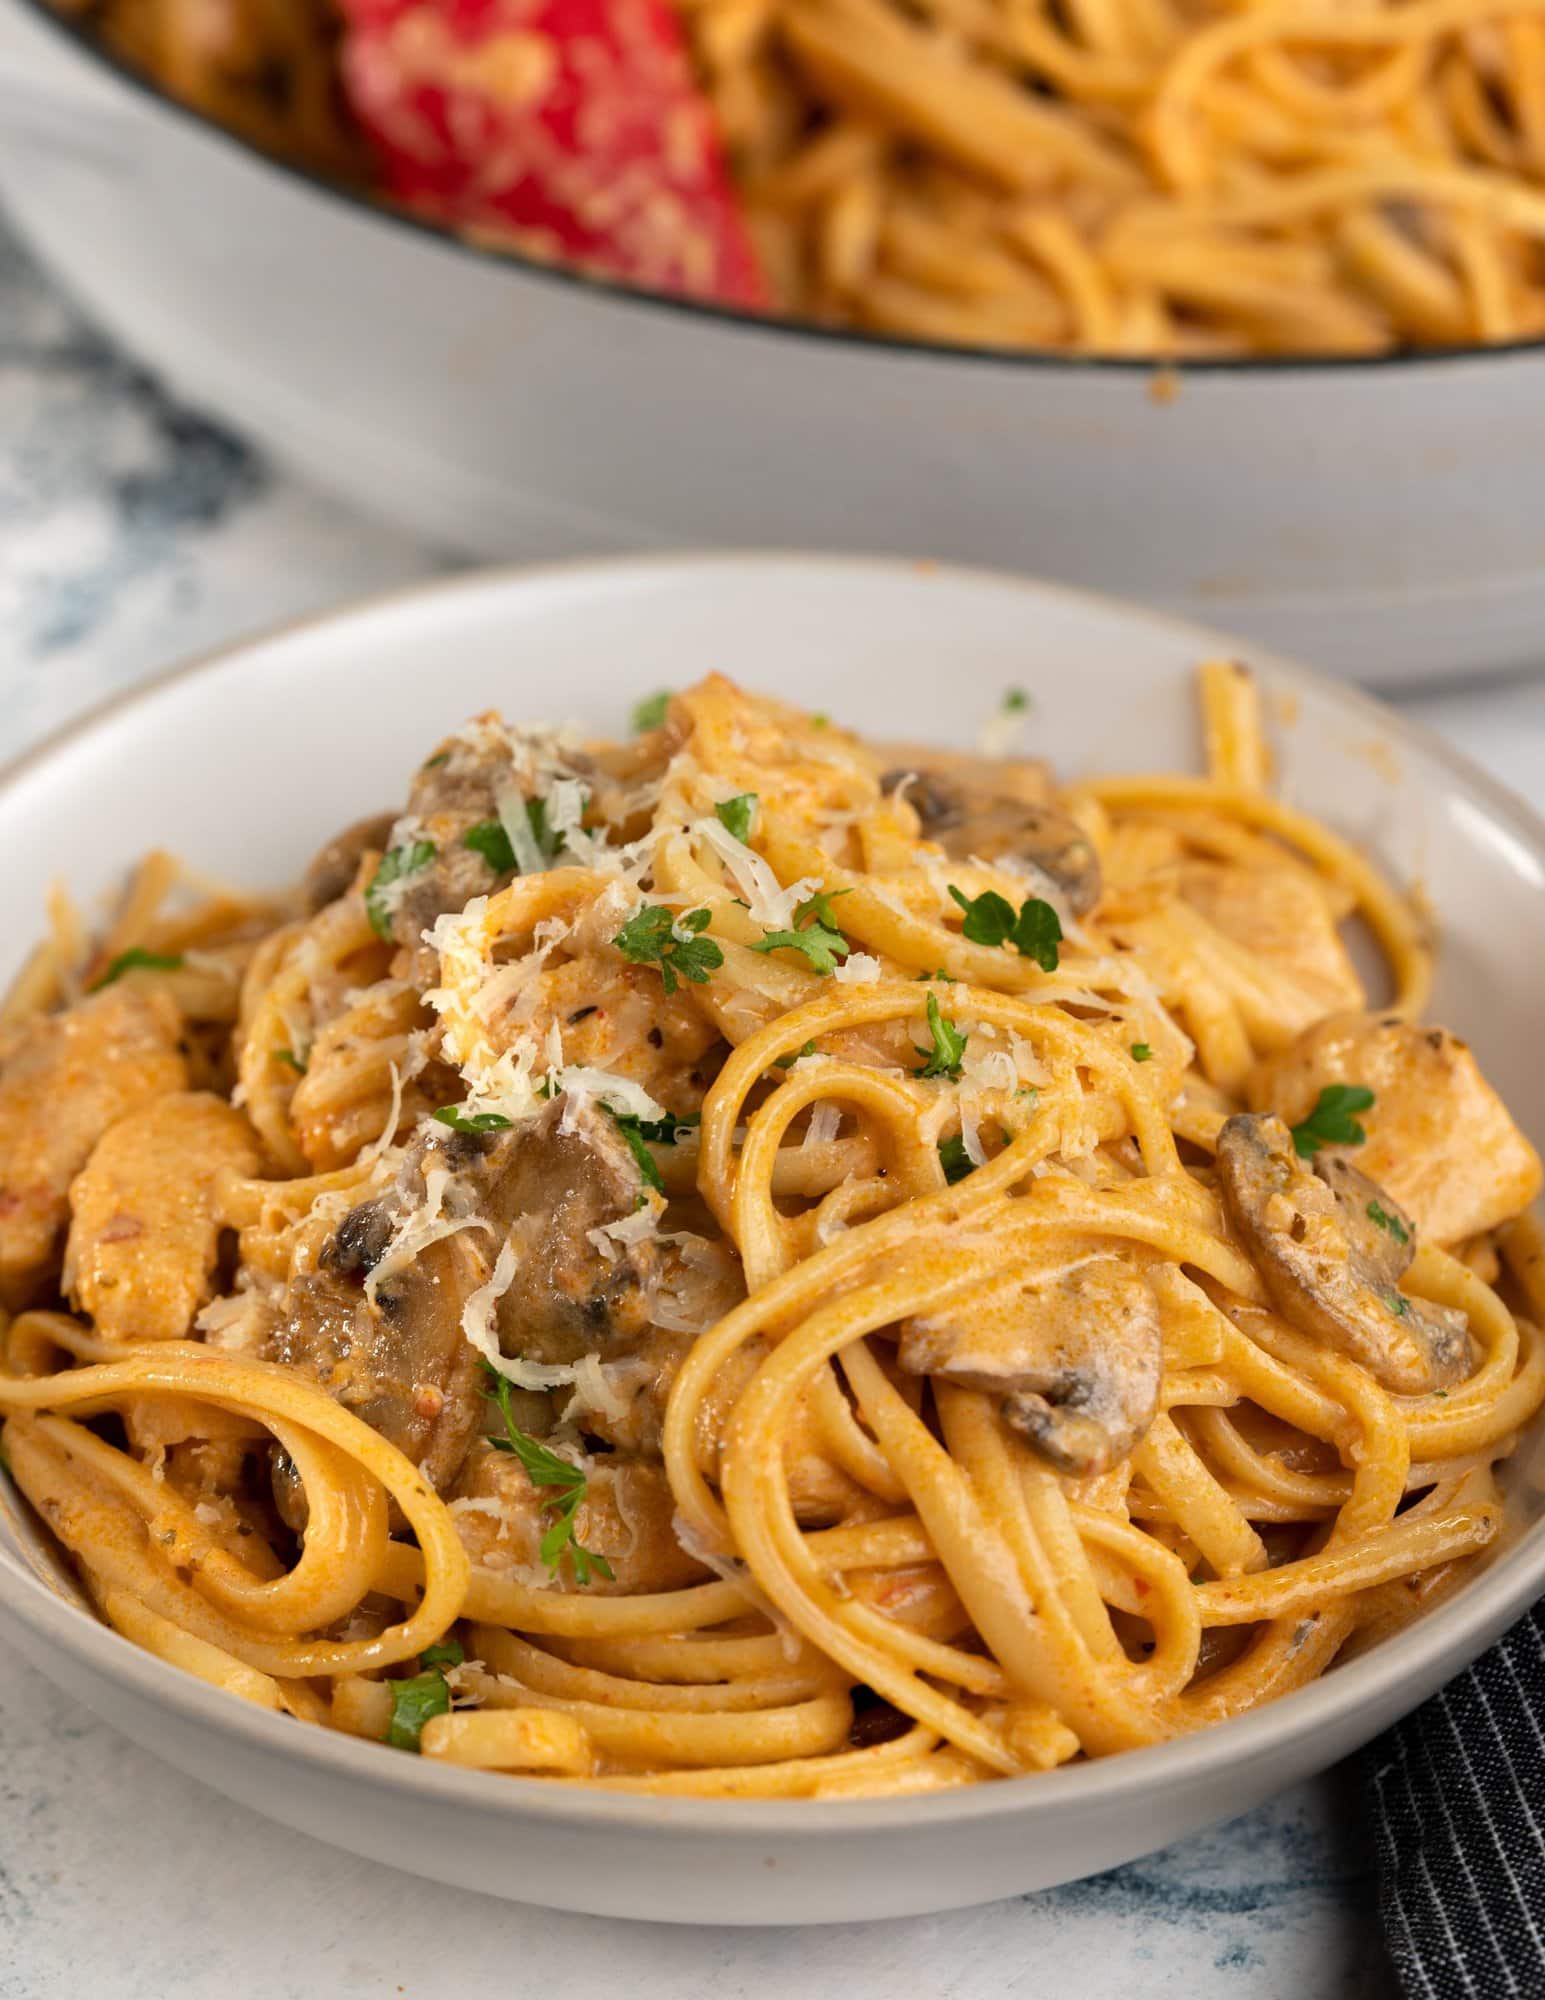 This spicy chicken pasta in a rich garlicky tomato sauce is creamy and has a perfect hint of spice. Roasted mushrooms and juicy chicken breast makes this Chicken pasta a filling meal on its own.